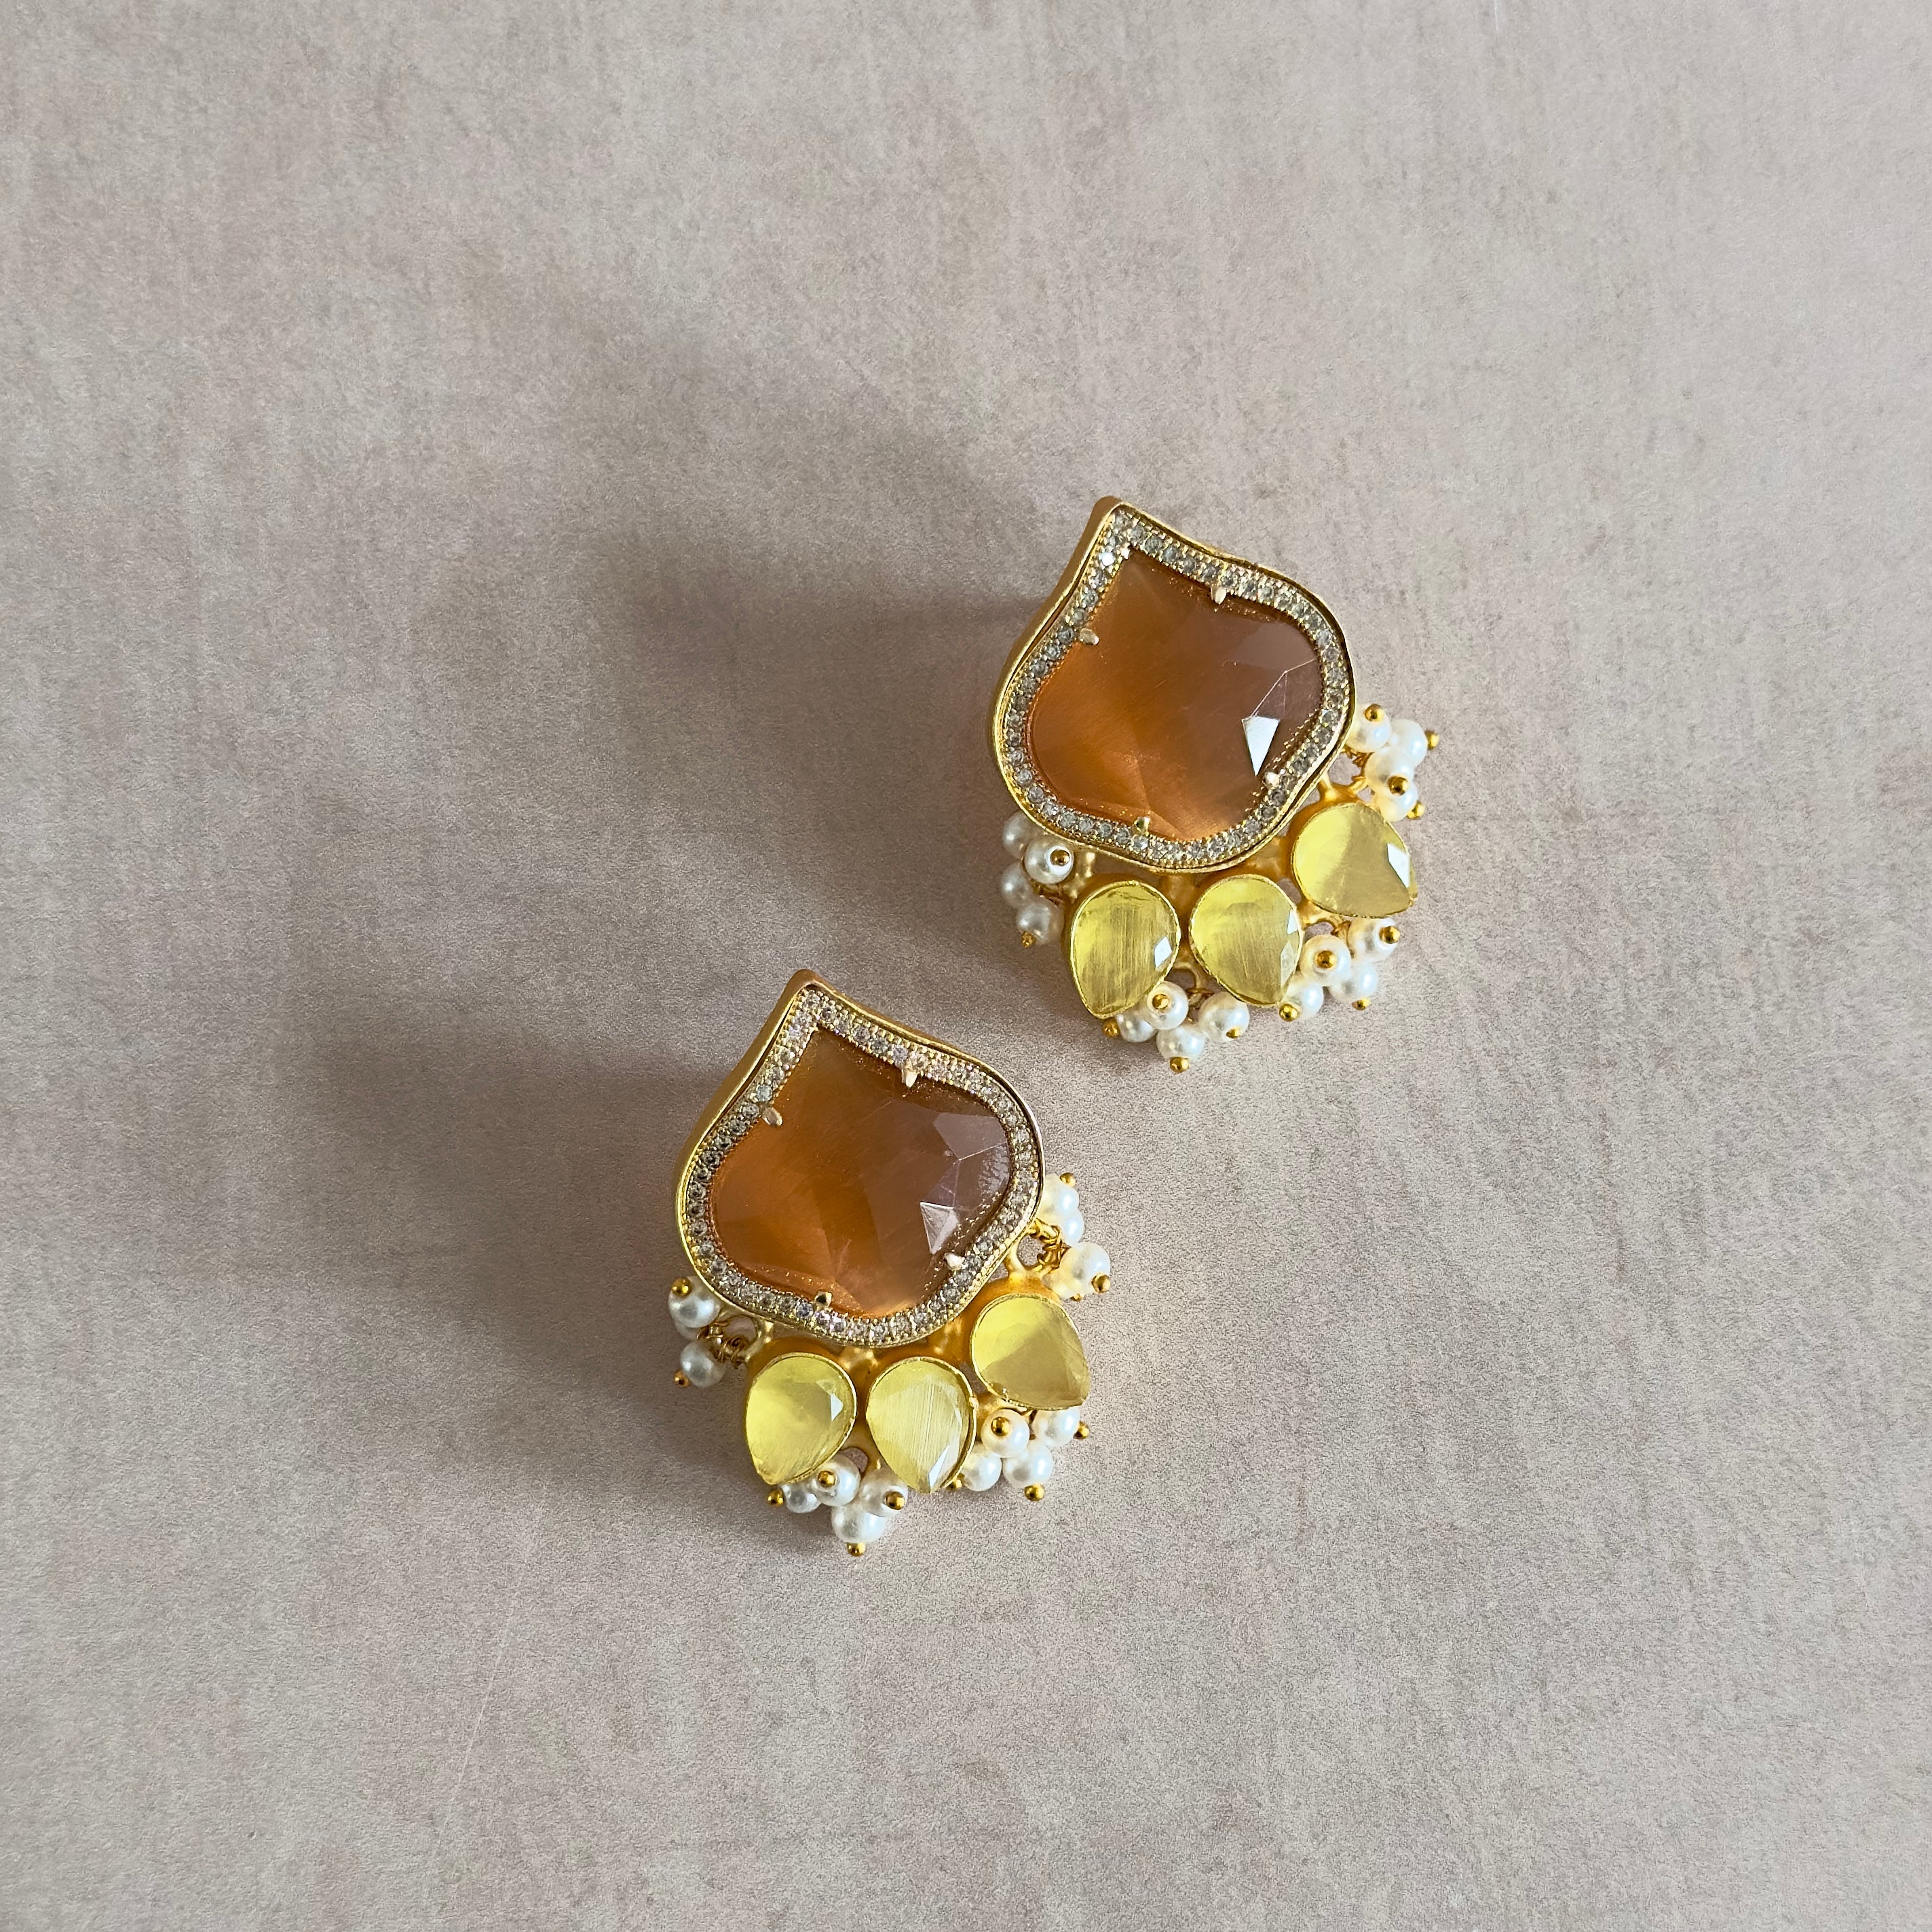 Elevate your summer wardrobe with the Aria Honey Stud Earrings, featuring hues of honey and lemon that evoke the warm, sunny days of the season. These earrings will add a touch of natural beauty to any outfit, making you feel effortlessly stylish and radiant.